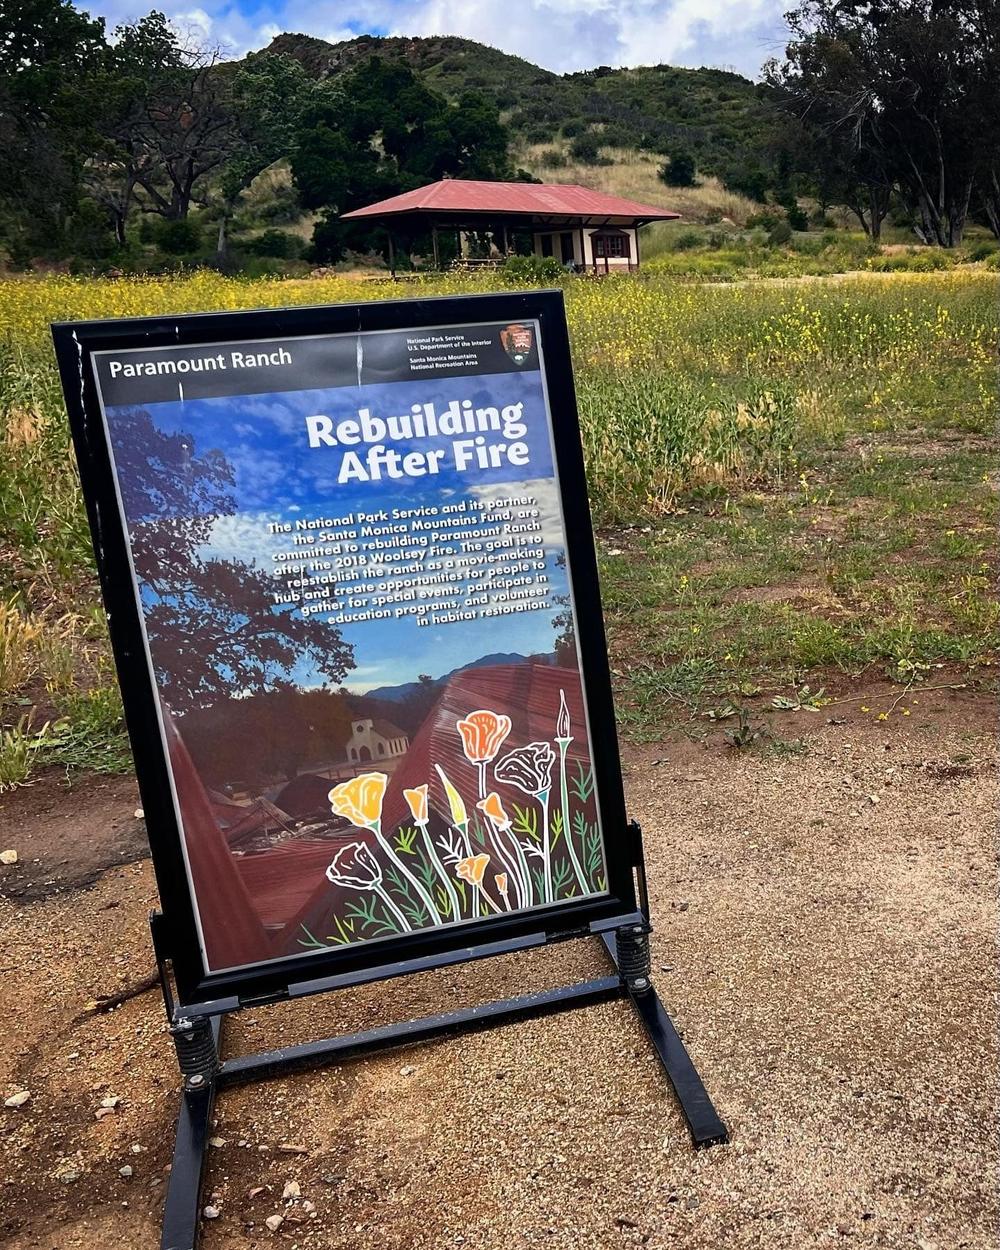 A sign at the Paramount Ranch explains the recovery efforts.